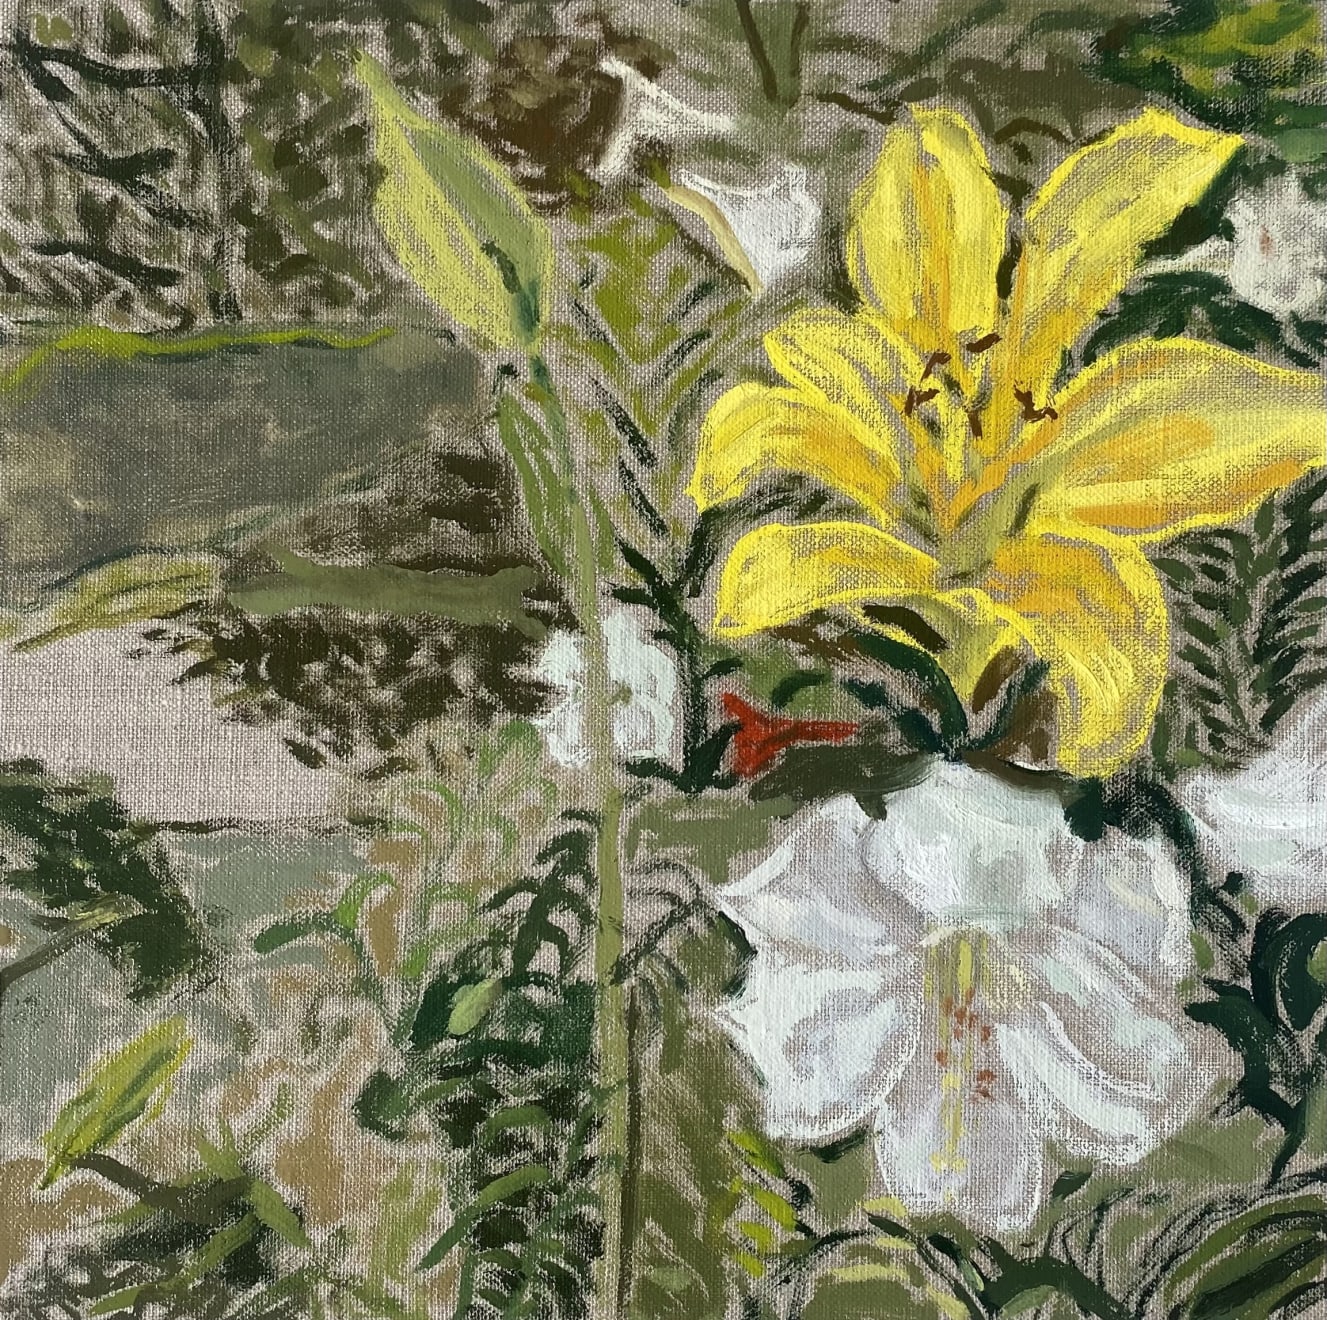 Elynor Smithwick Lilies Continued II Oil Paint on Linen Board 30 x 30cm Unframed AUD $880 GBP £460 USD $600 Framed AUD $1010 GBP £530 USD $690 SOLD